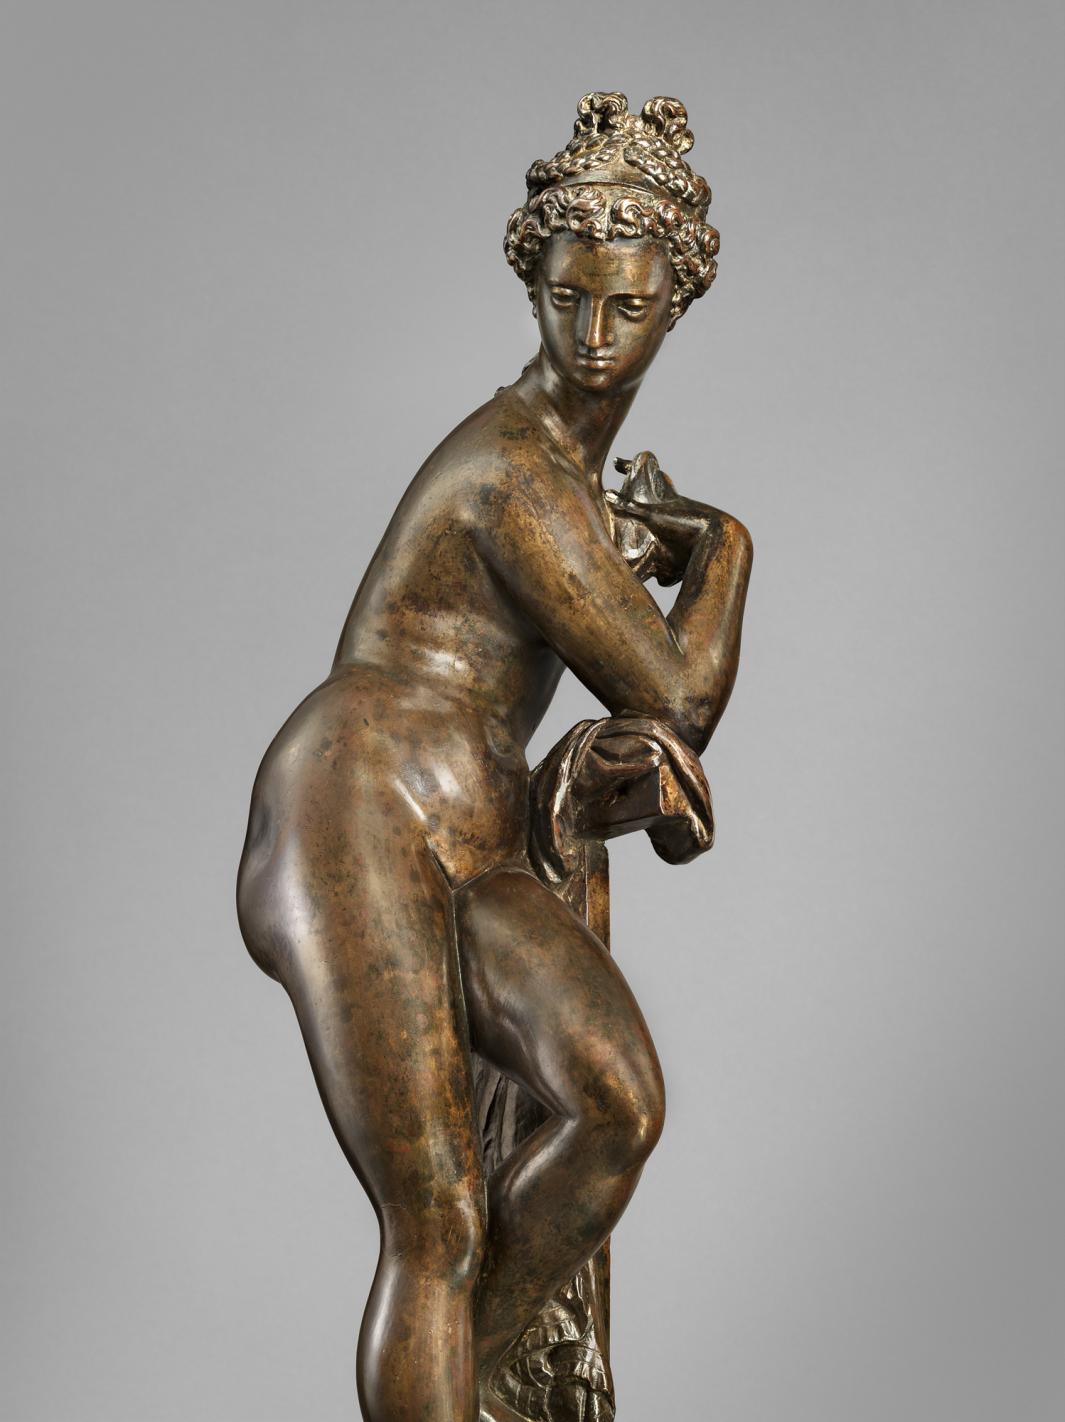 Bronze sculpture of a standing woman, leaning on a post, side view.